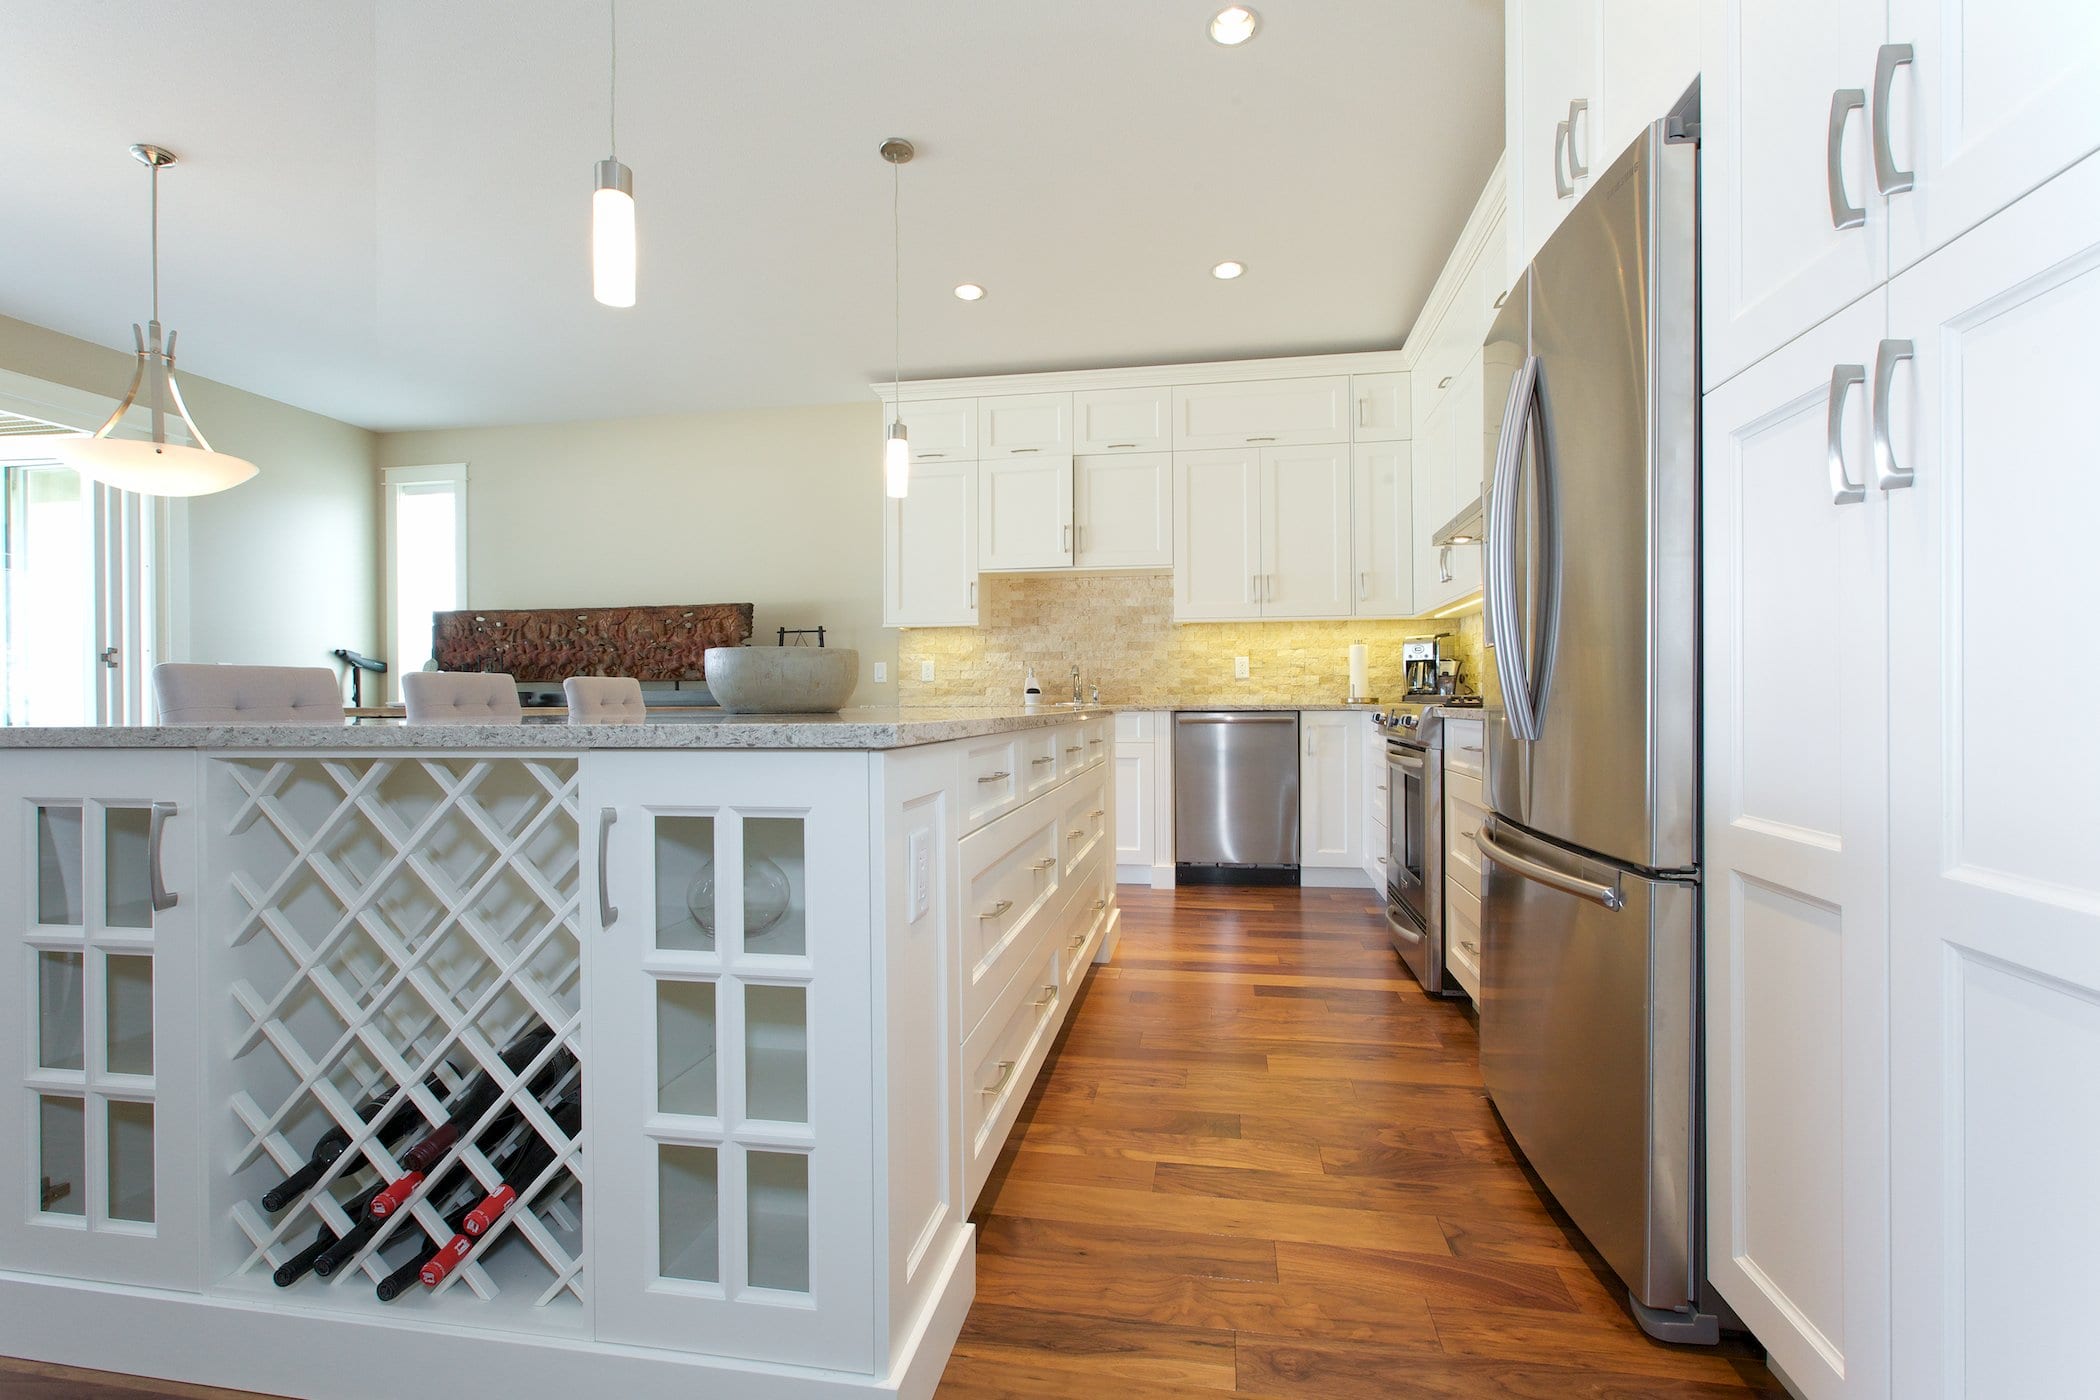 interior shot of west harbour home kitchen with white cabinetry fridge freezer stove and dishwasher